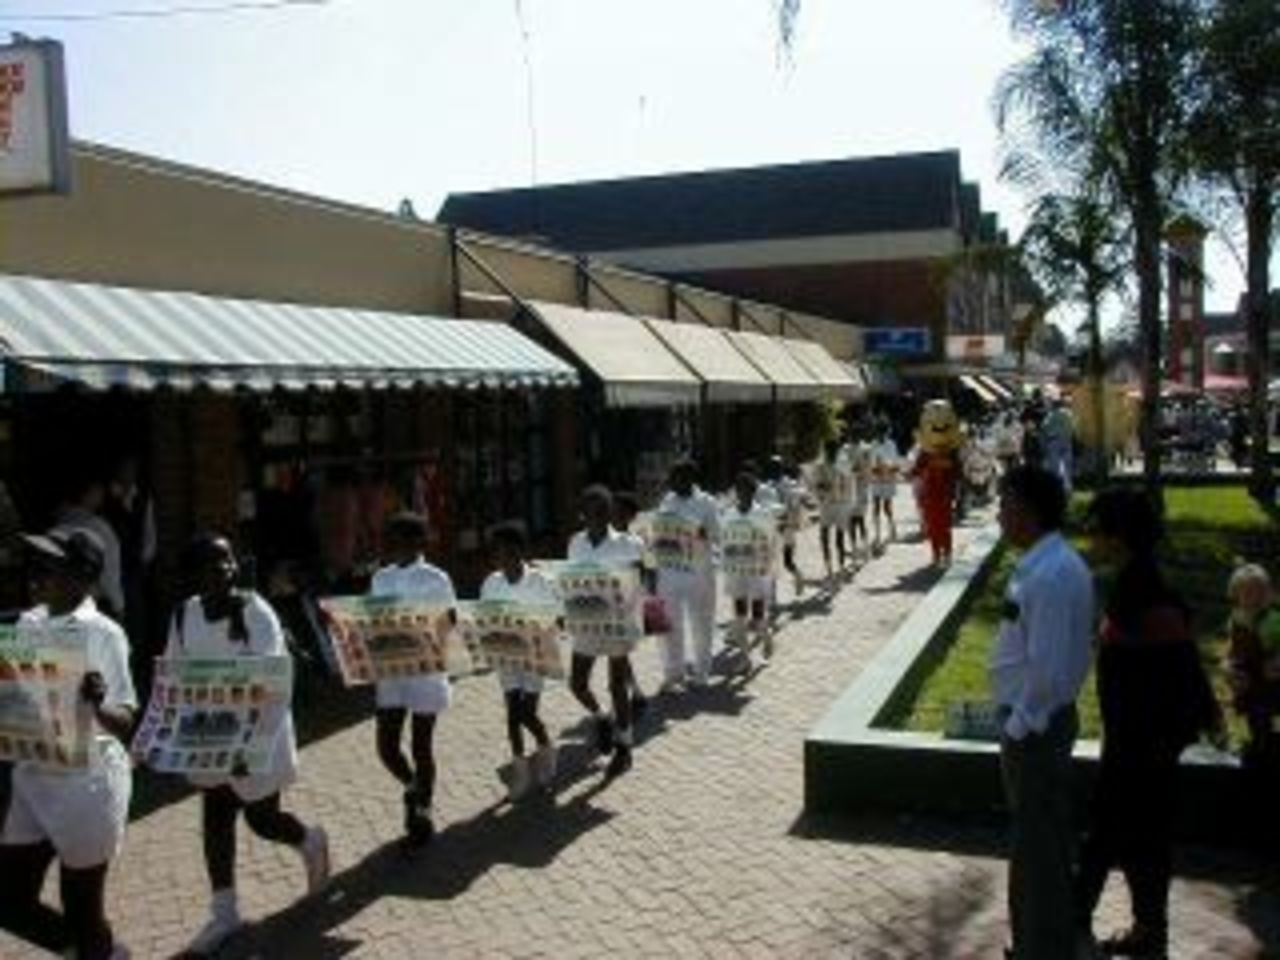 Children with Zimbabwe team posters - The Zimbabwe World Cup team is welcomed home  with a parade in Harare - 19 June 1999